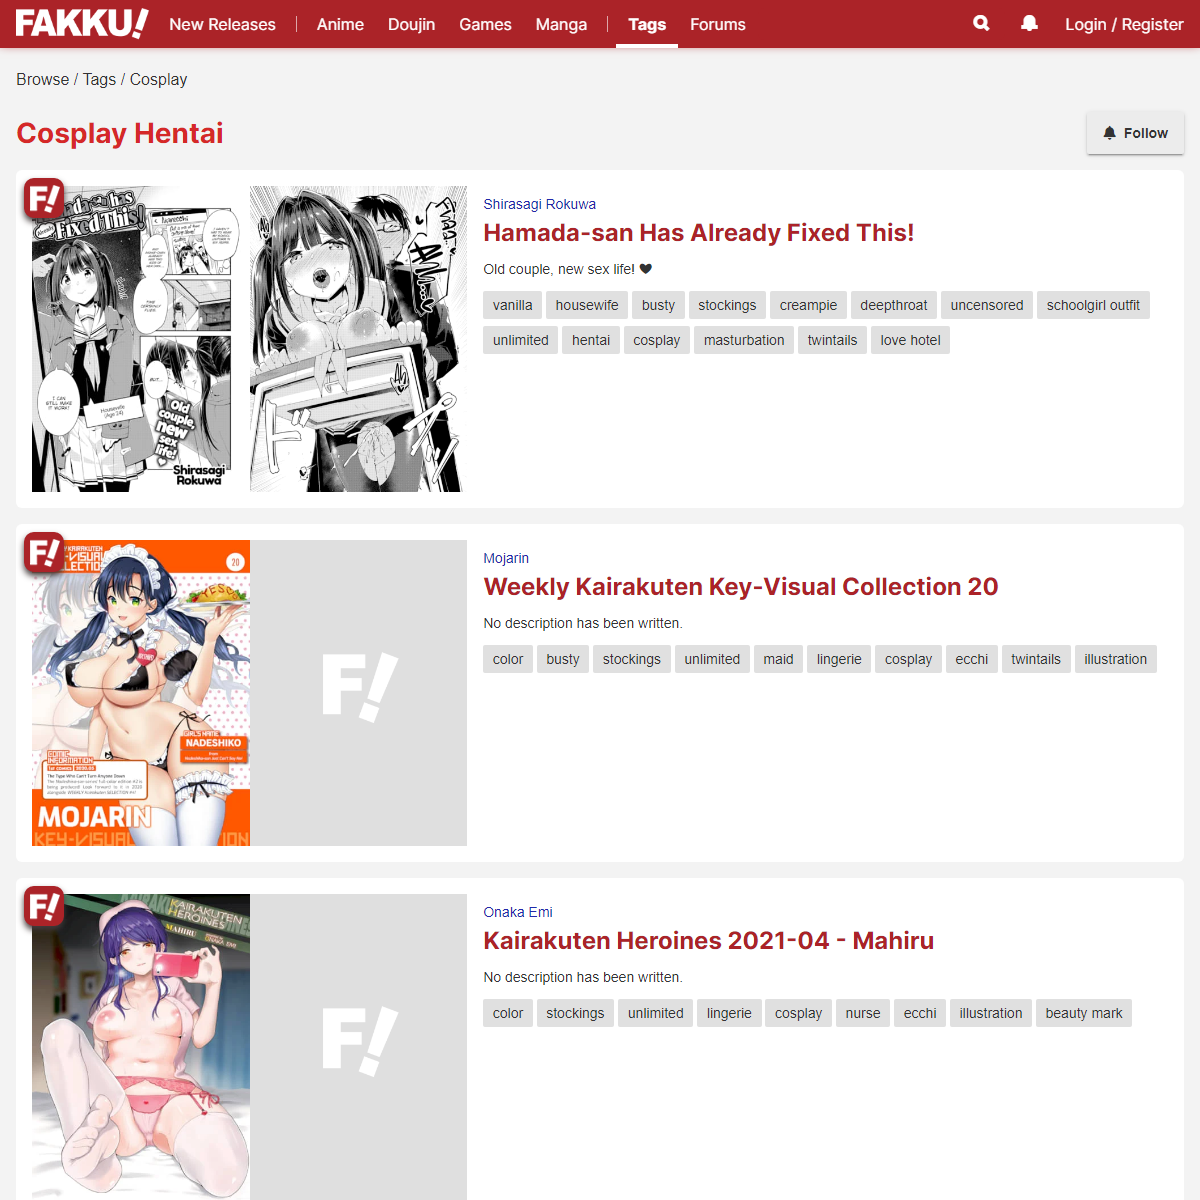 A complete backup of https://www.fakku.net/tags/cosplay